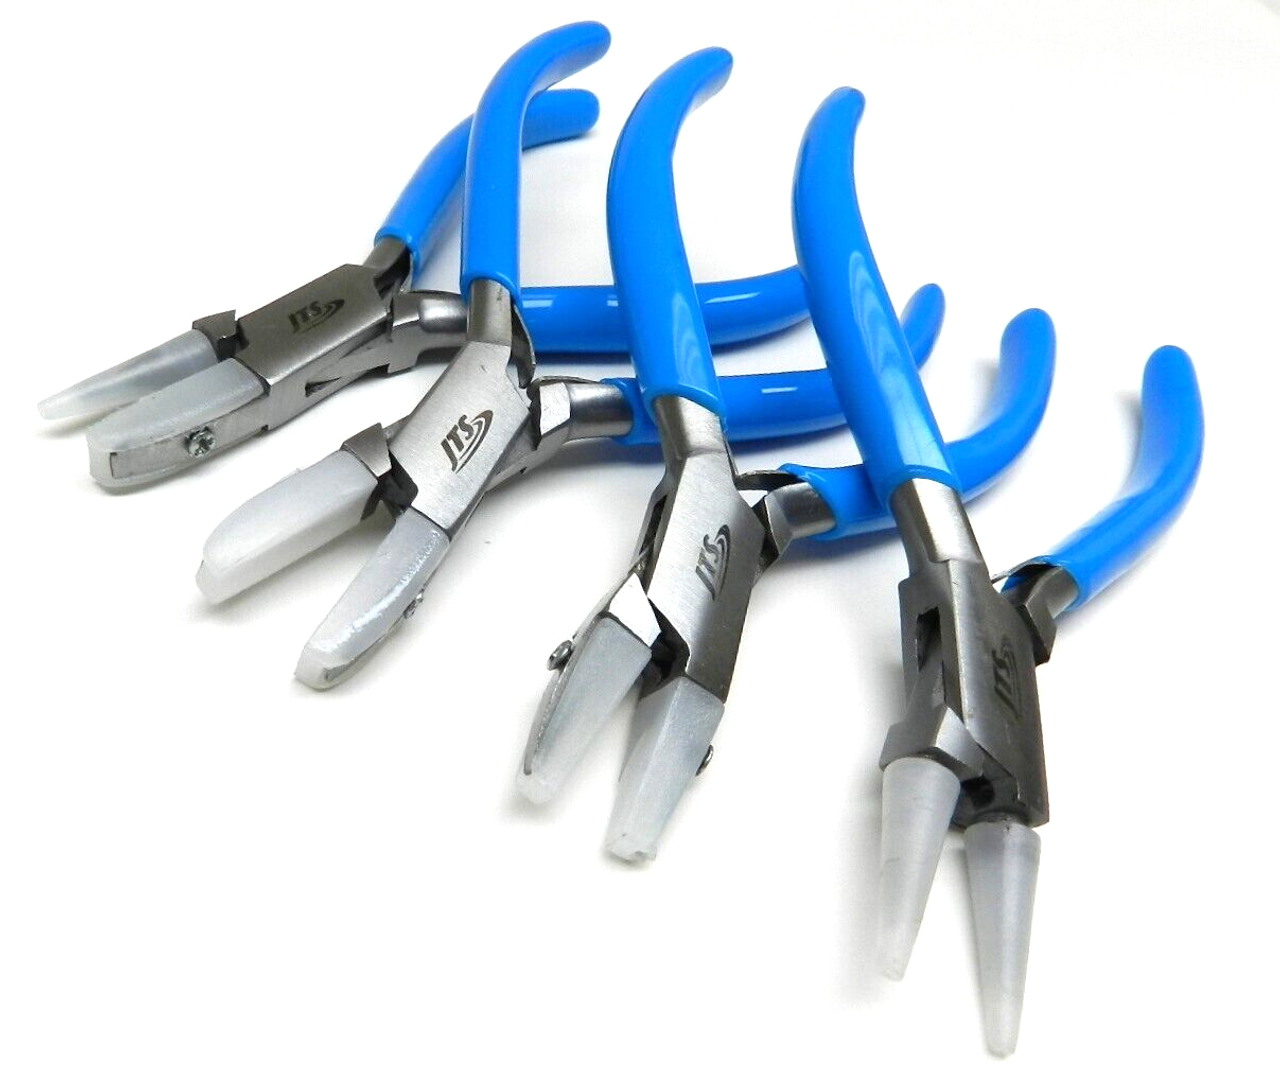 Nylon Jaw Pliers Set Jewelry Craft Bead Wire Working Bending Forming Hand Tools